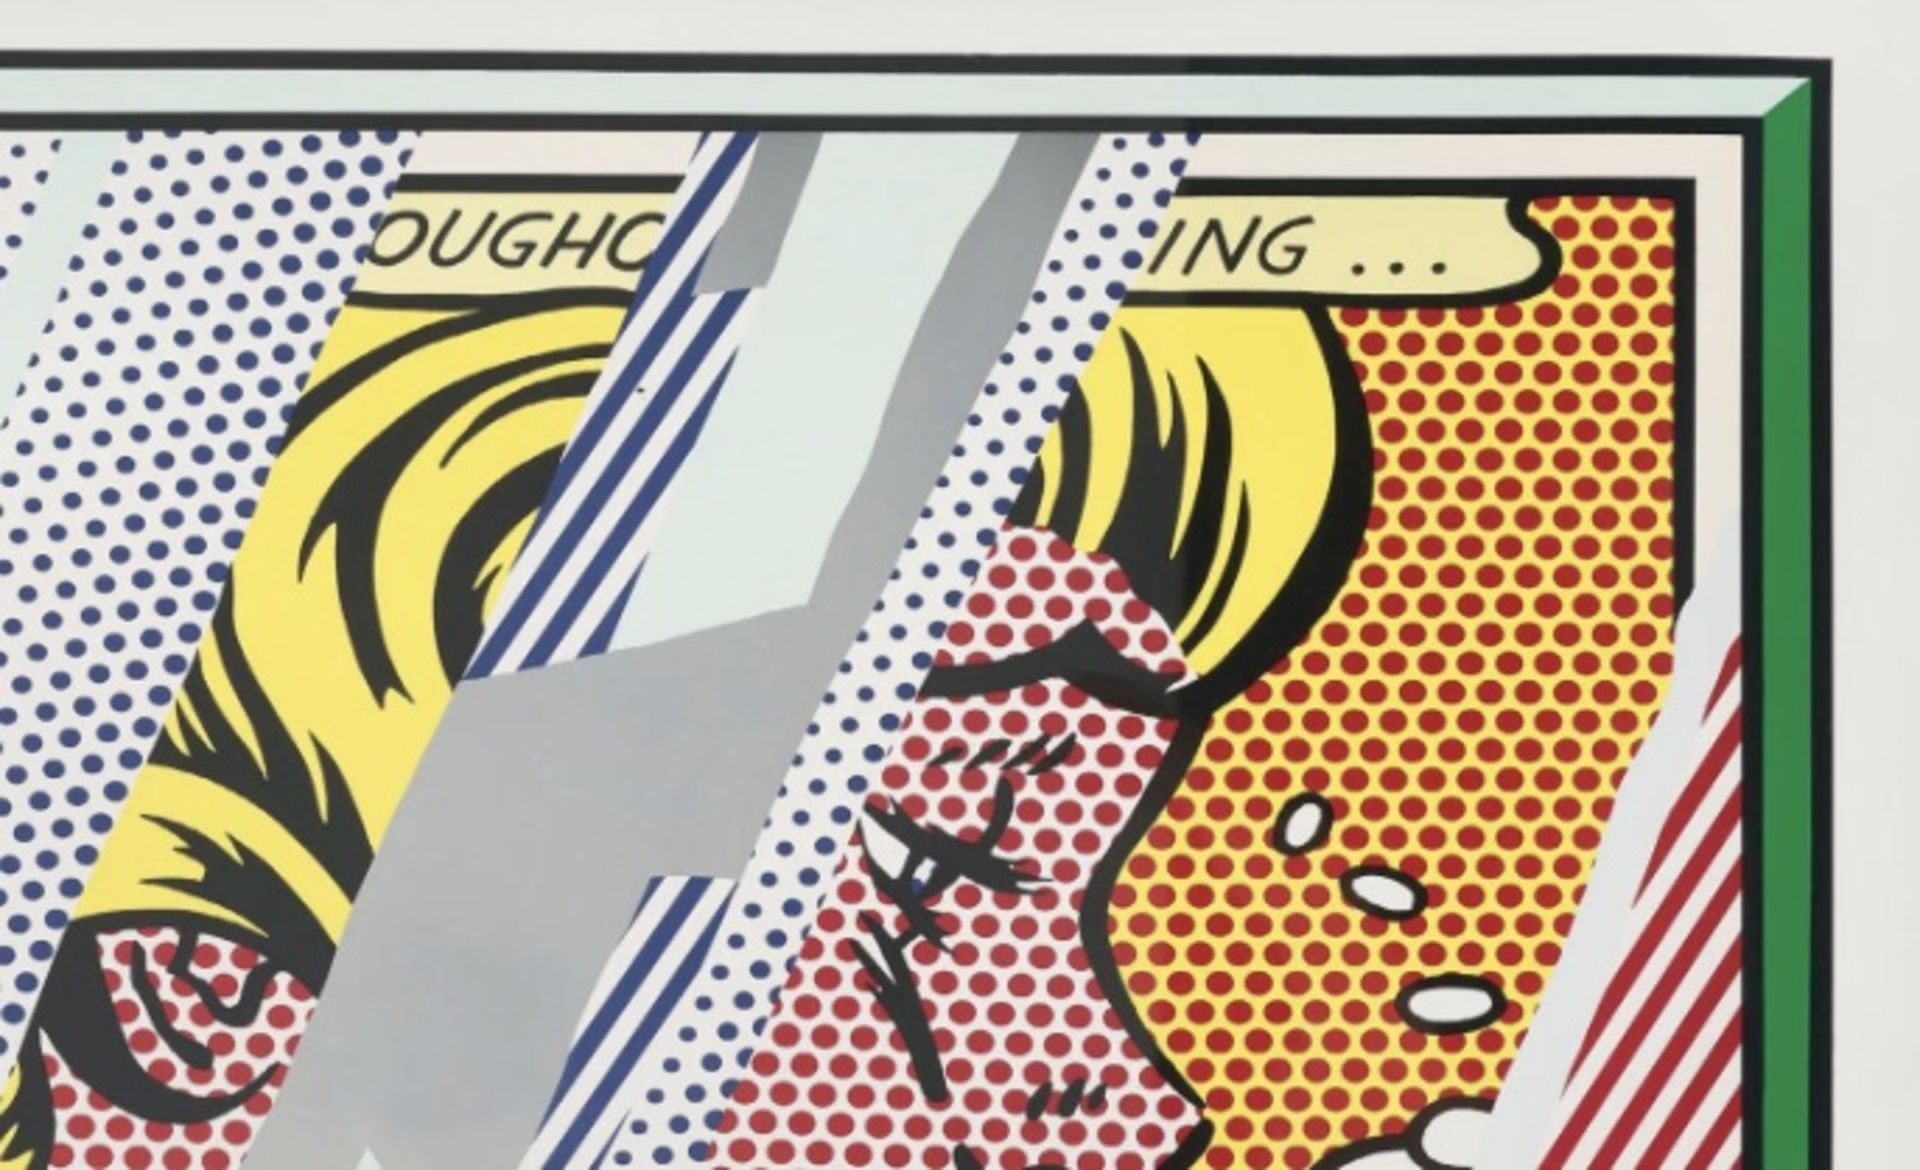 Roy Lichtenstein "Reflections on Girl, 1990" Plate Signed Offset Lithograph - Image 4 of 5